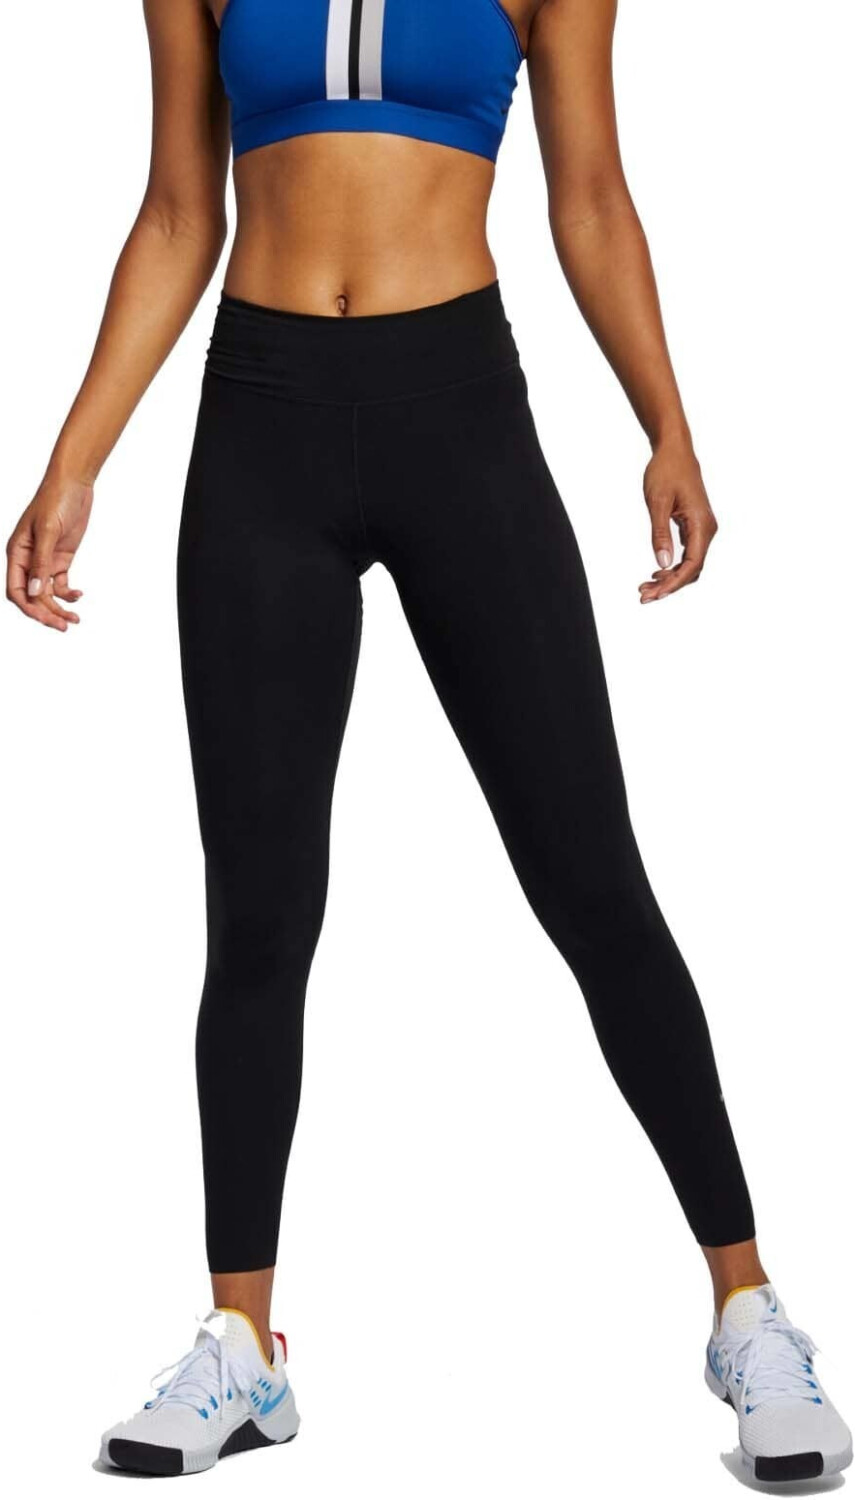 BNWT Nike Women's One Luxe Black Mid-Rise Training Leggings (AT3098-010)  Size S